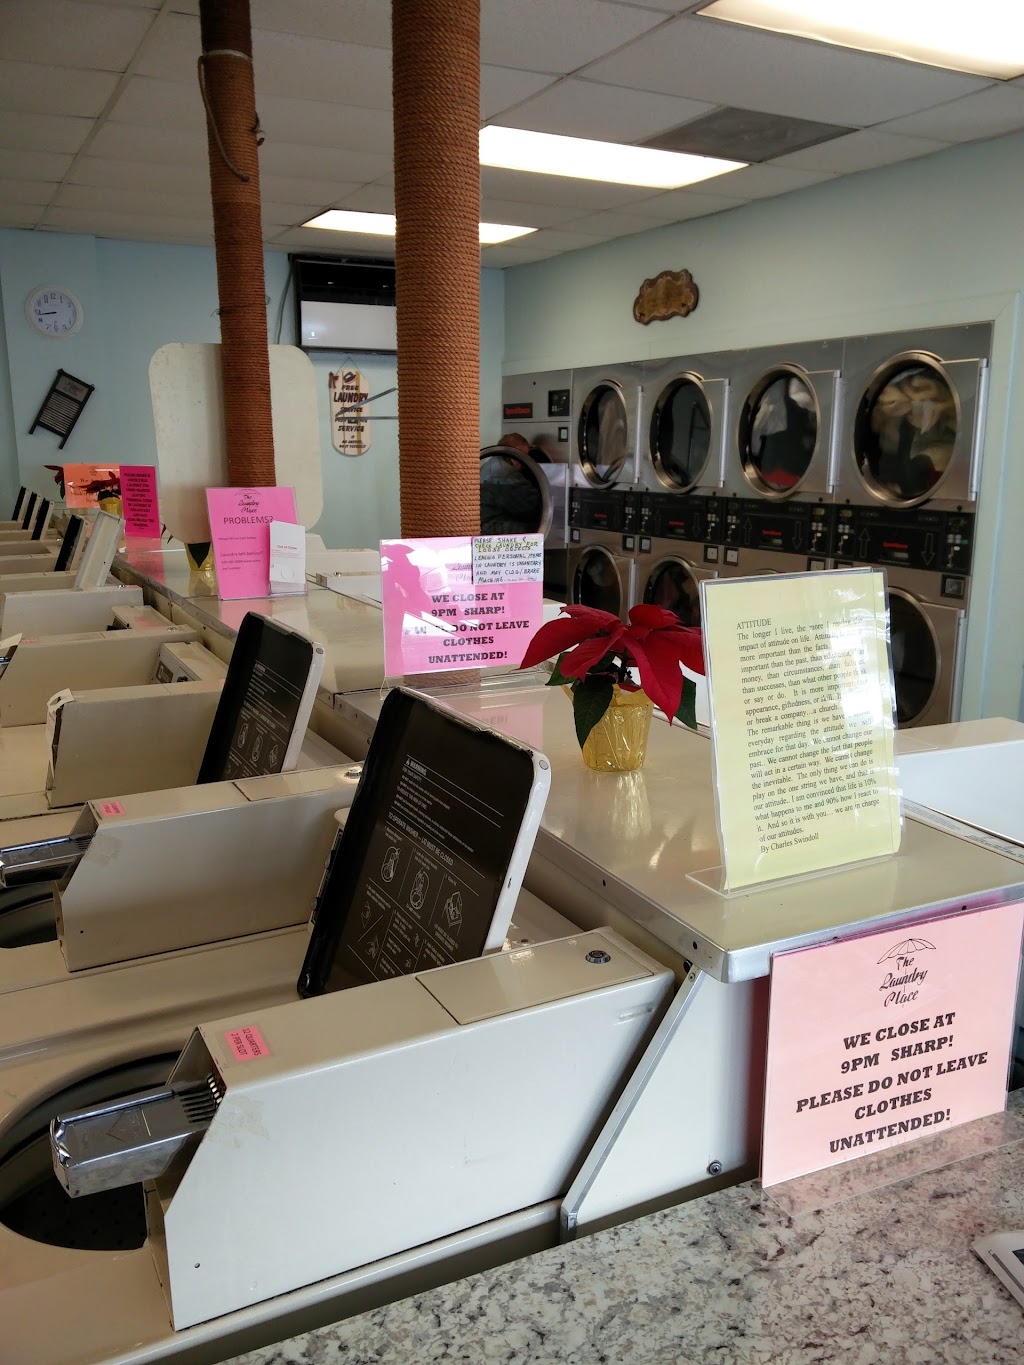 The Laundry Place | 128 S 3rd St, Coopersburg, PA 18036 | Phone: (610) 554-1102